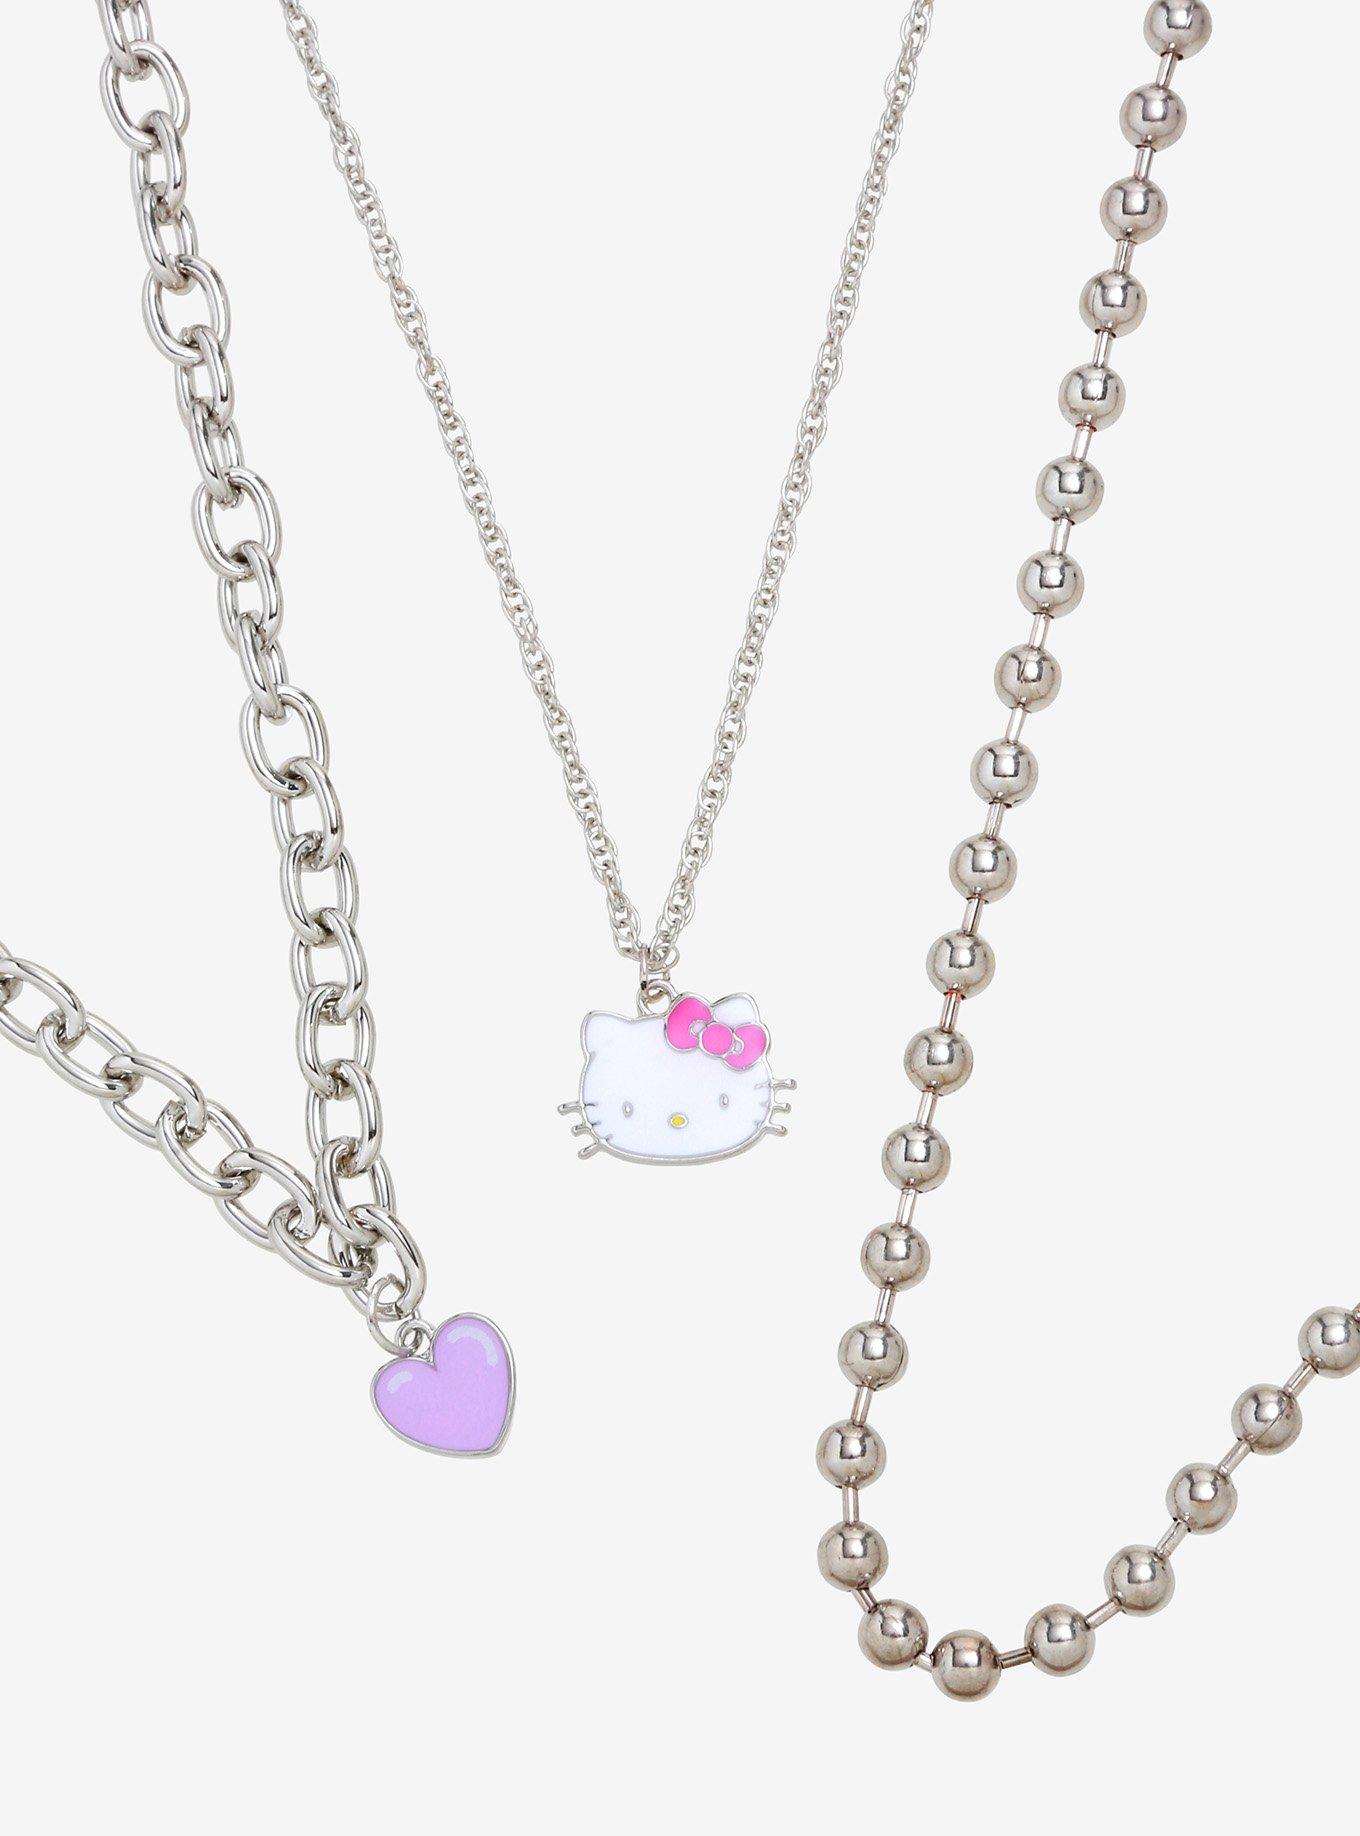 Enamel Magnetic Sanrio Family Matching Necklace - Hello Kitty